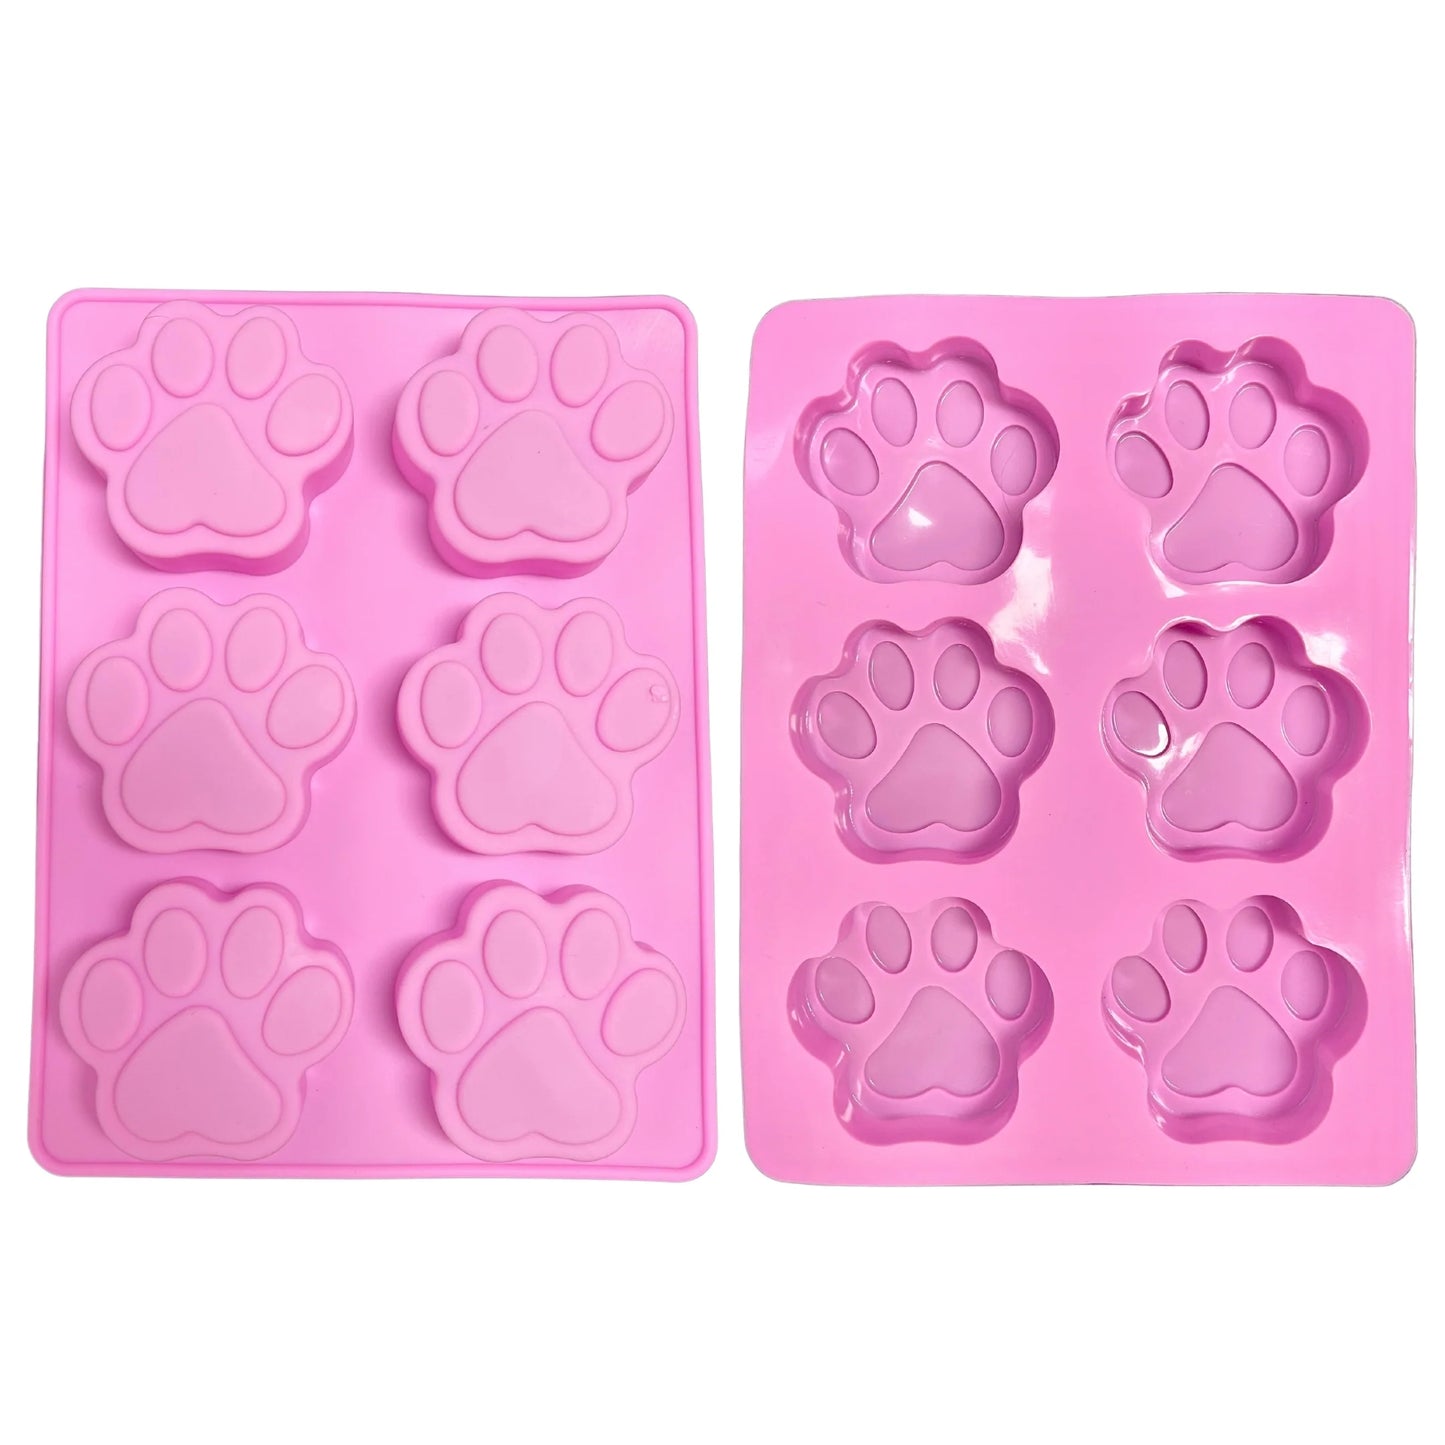 paw shaped silicone mould for dog treats, let's pawty